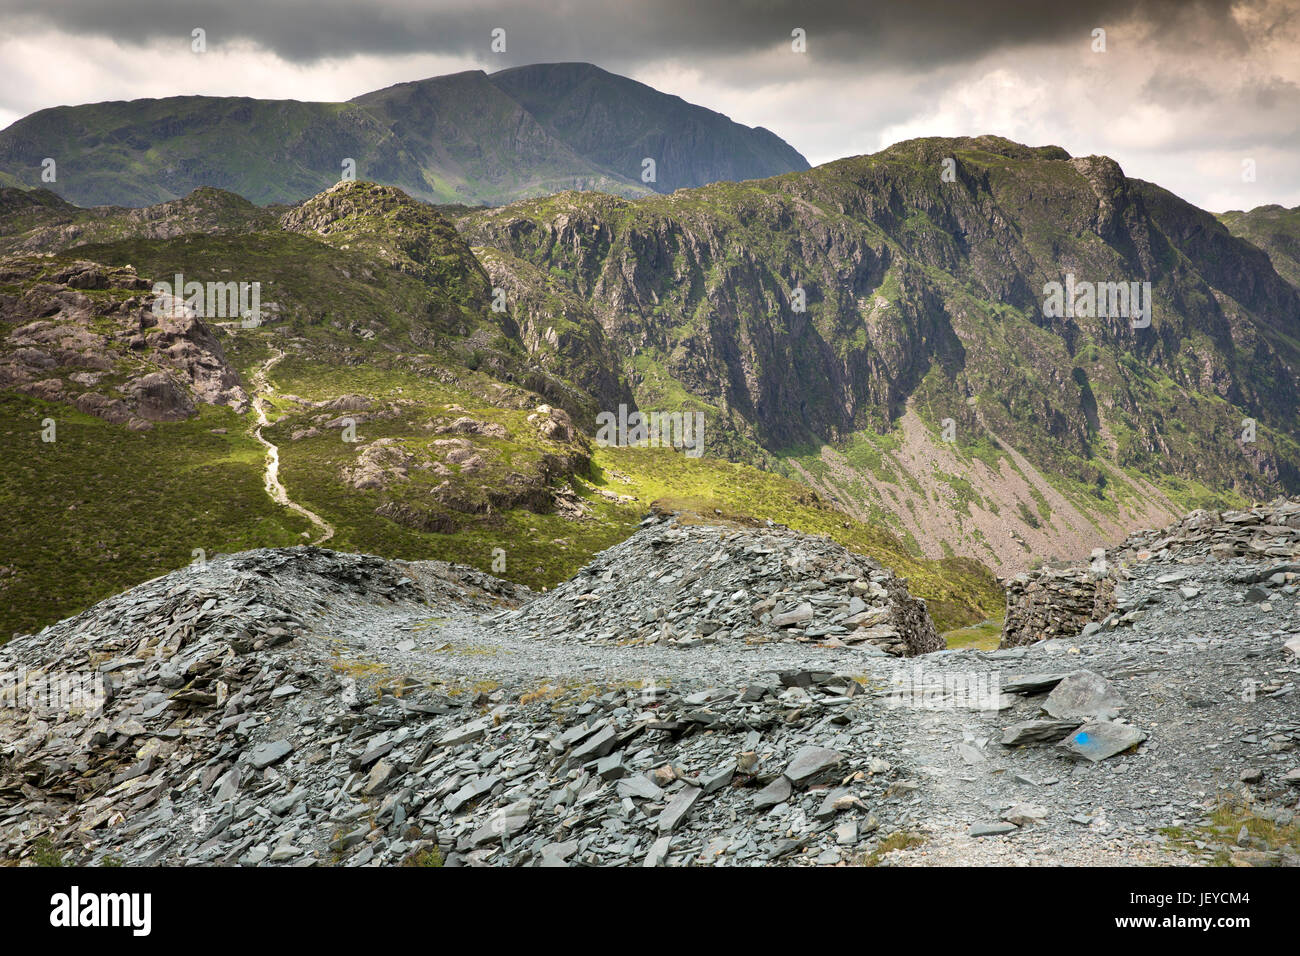 Cmb565	UK, Cumbria, Fleetwith Pike, Hay Stacks and Great Gable, from old Dubs slate quarry spoil heap Stock Photo